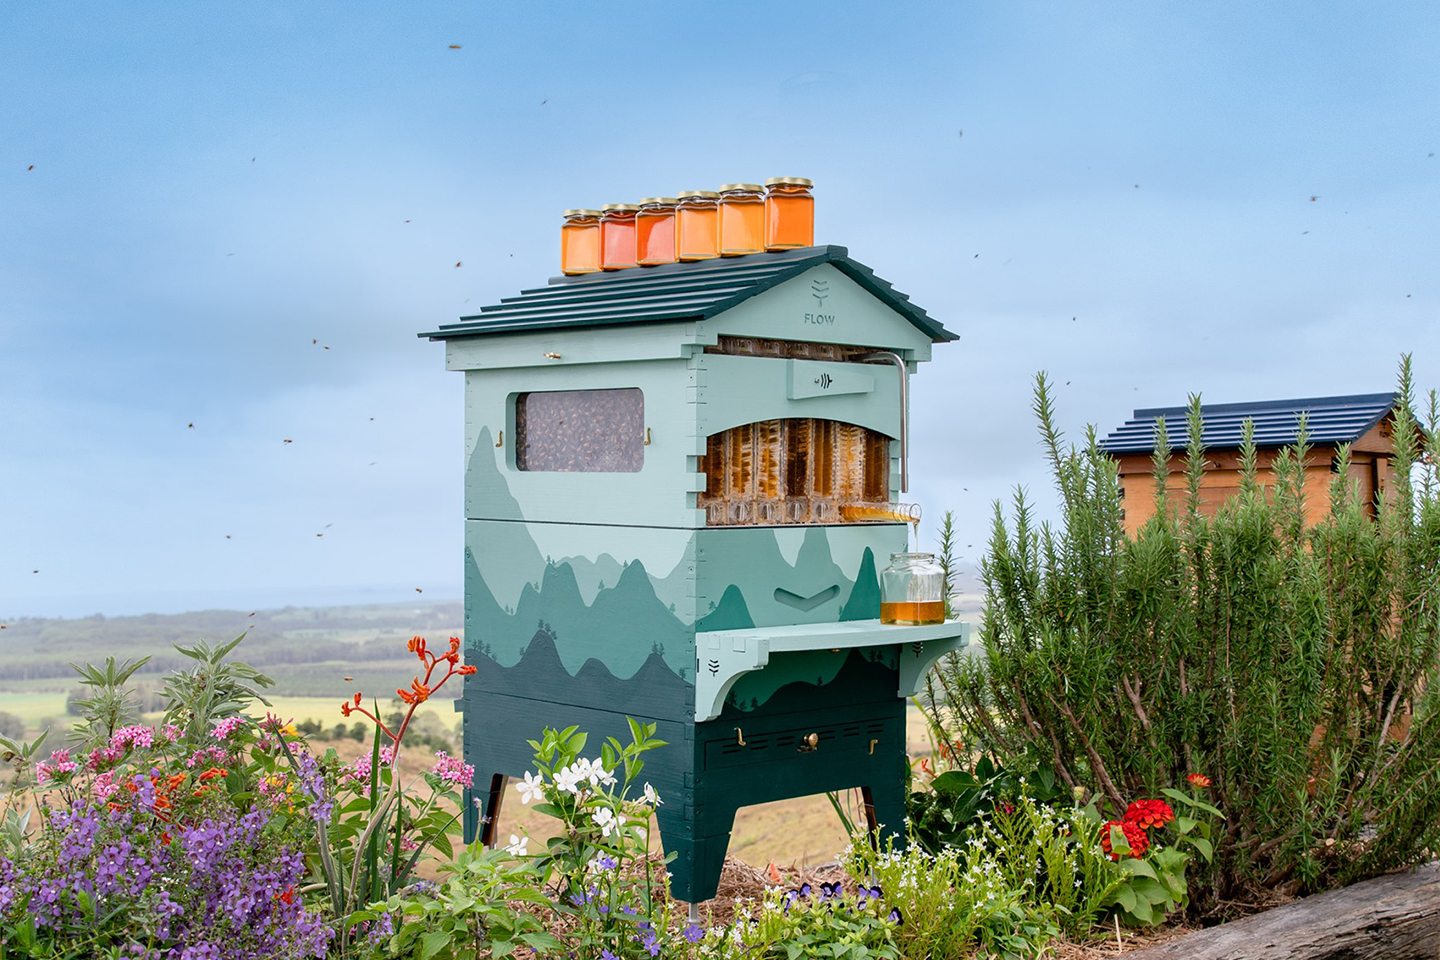 The world’s most innovative beehive makes beekeeping efficient, reduces waste & gets honey on tap!